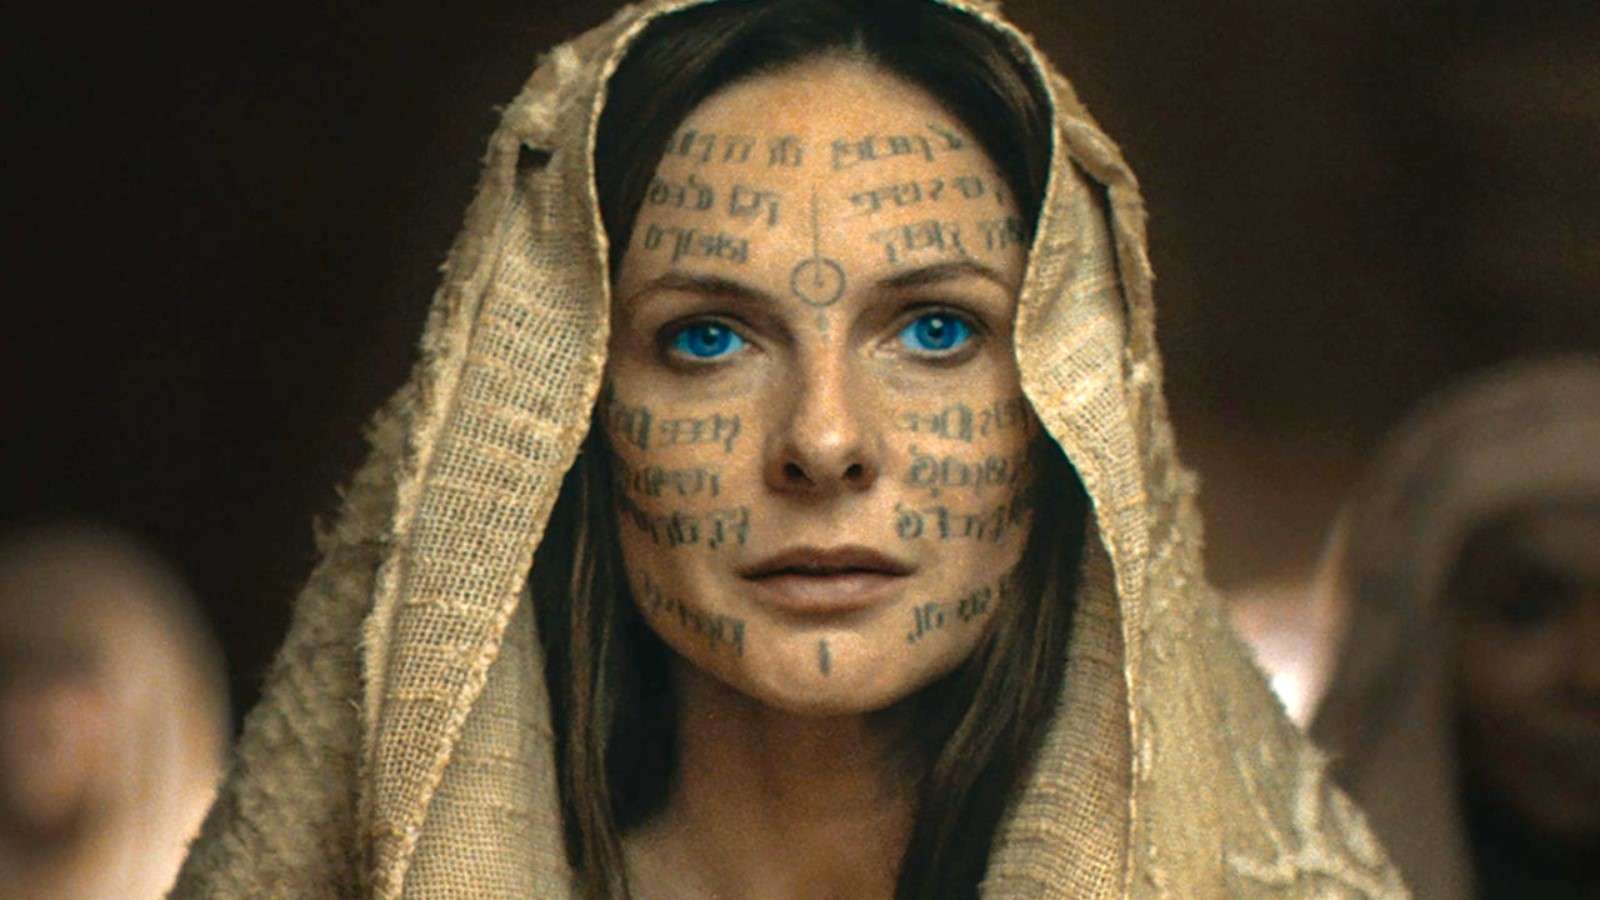 Rebecca Ferguson as Lady Jessica in Dune 2, with writing across her face